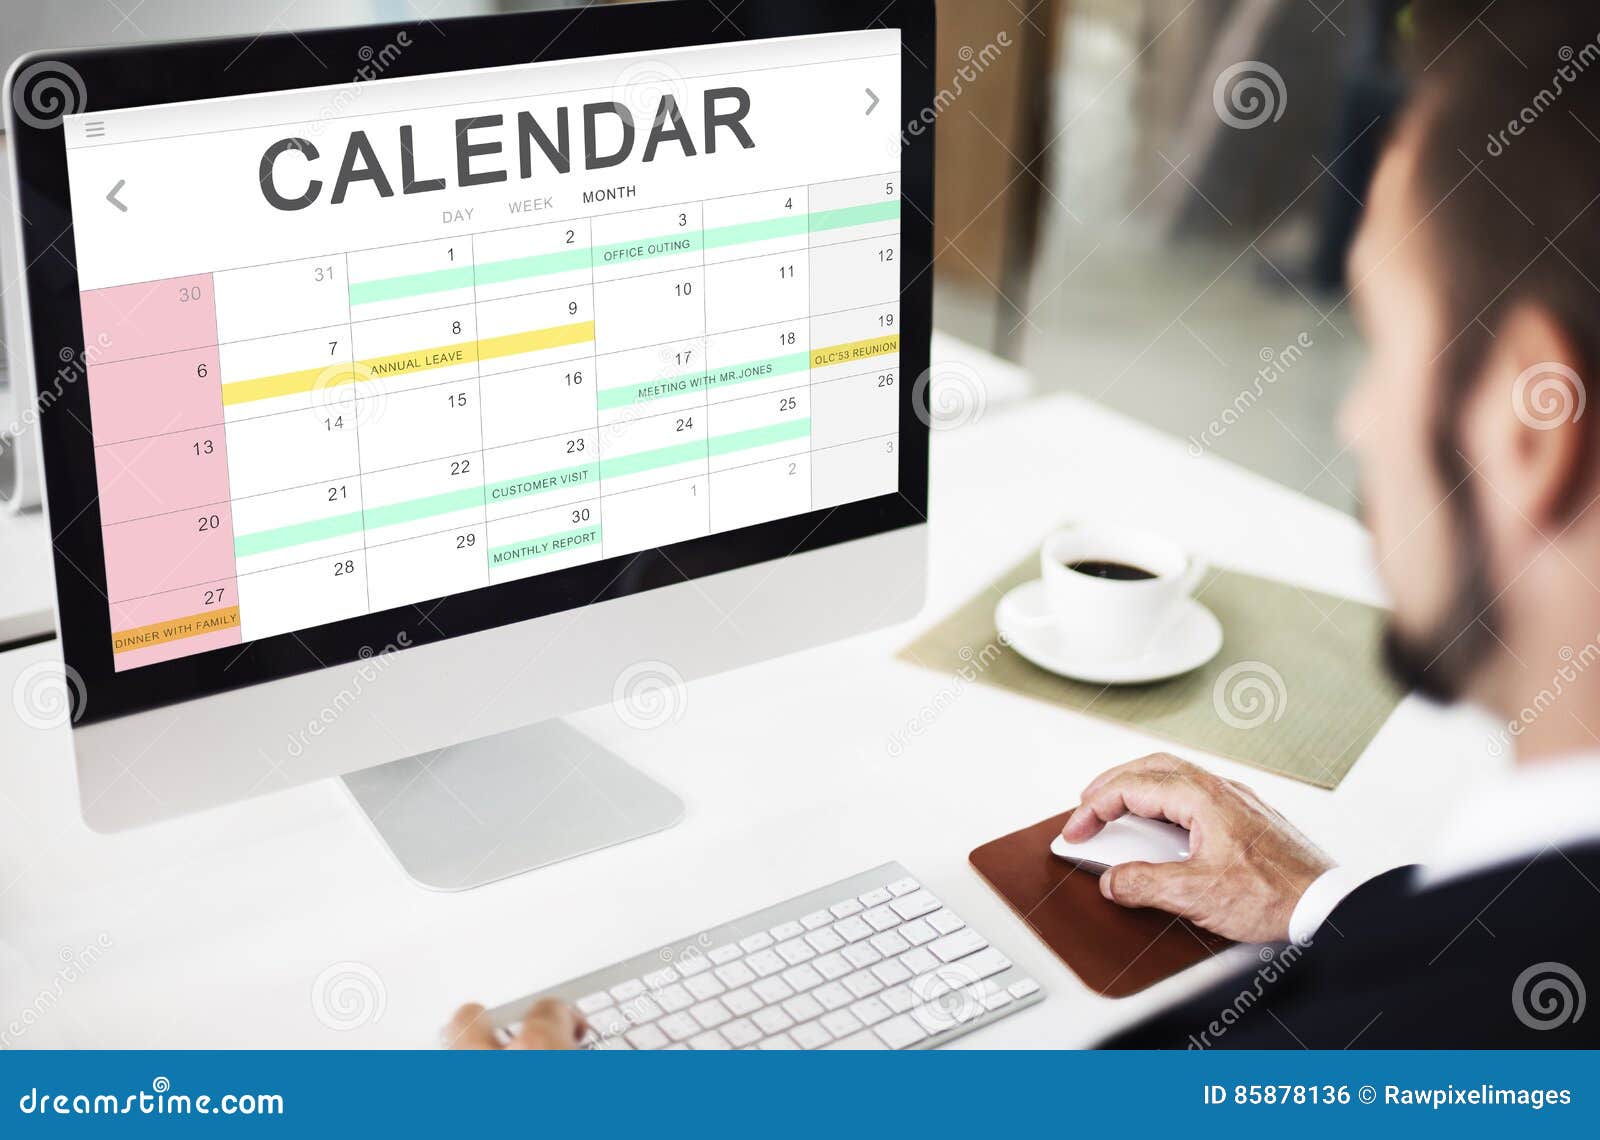 Calendar Agenda Event Meeting Reminder Schedule Graphic Concept Stock Photo - Image of ...1300 x 943